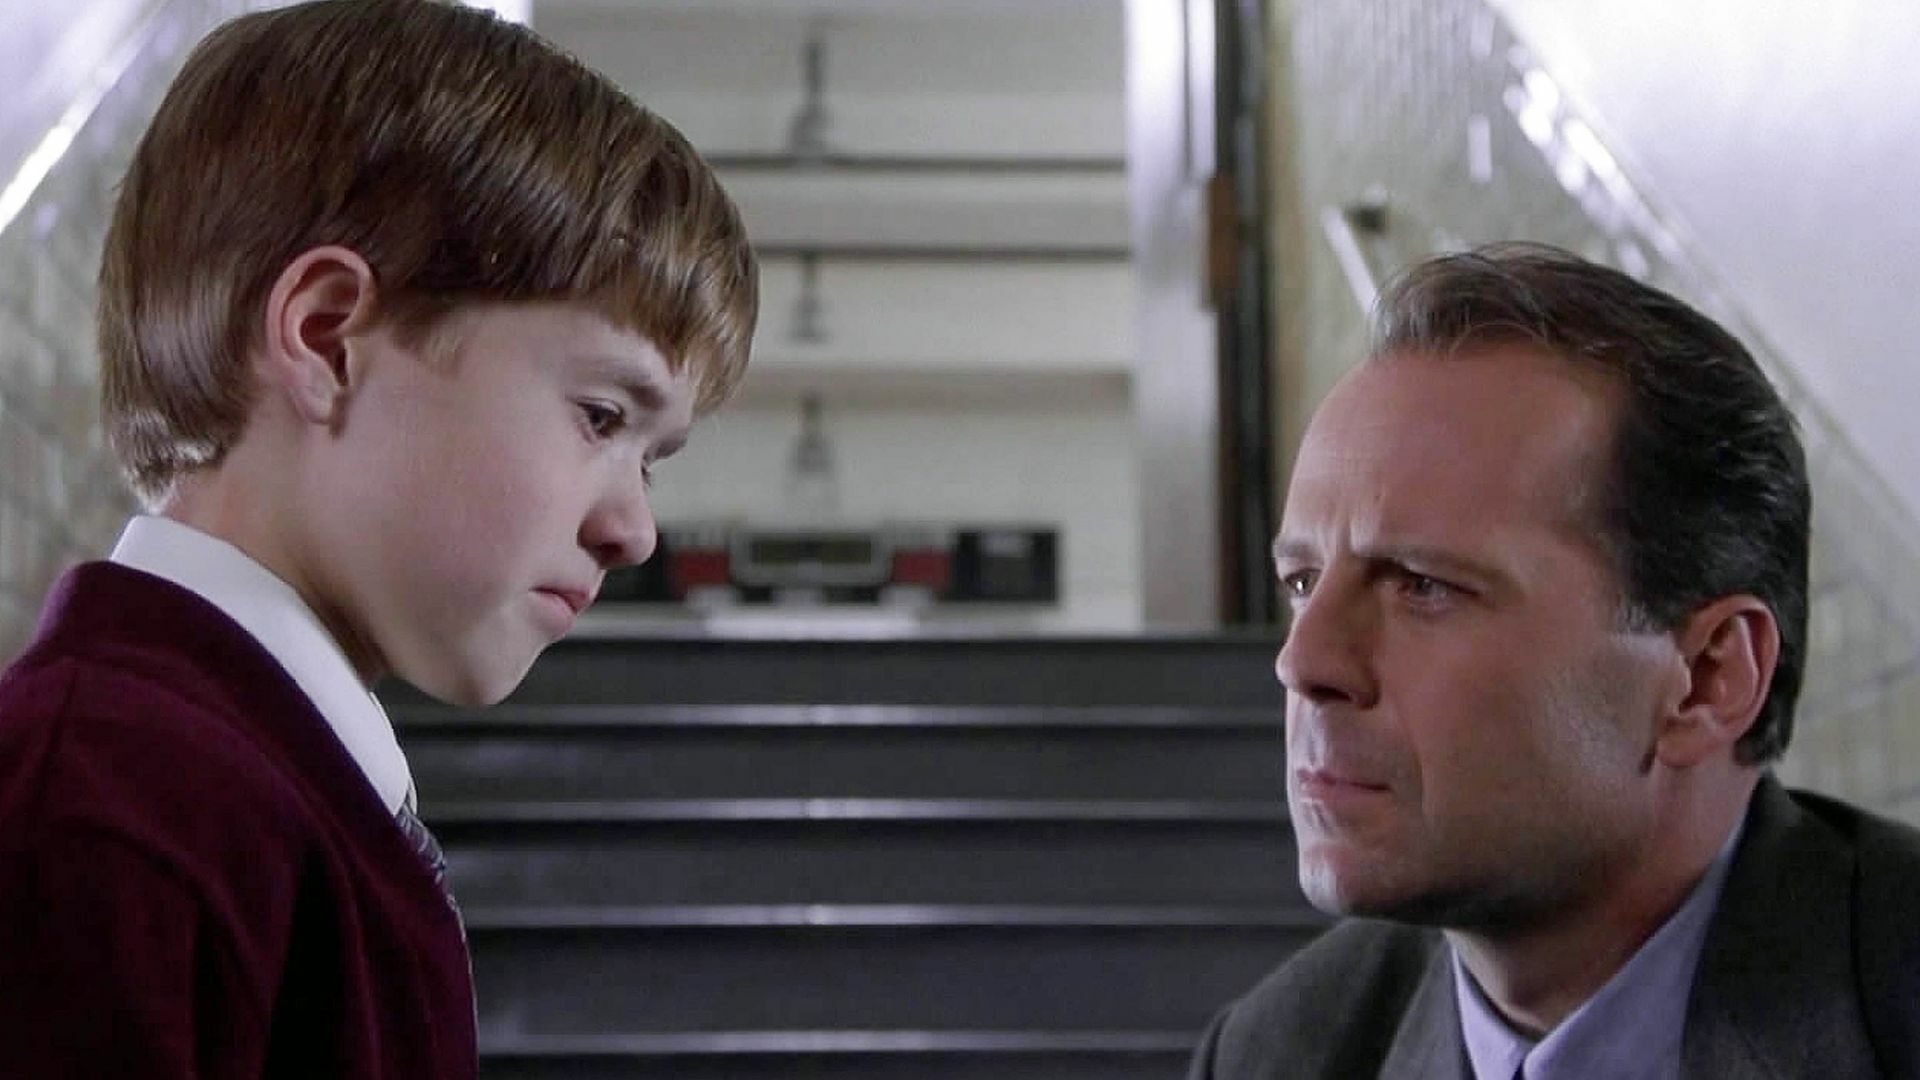  Haley Joel Osment and Bruce Willis in "The Sixth Sense." 